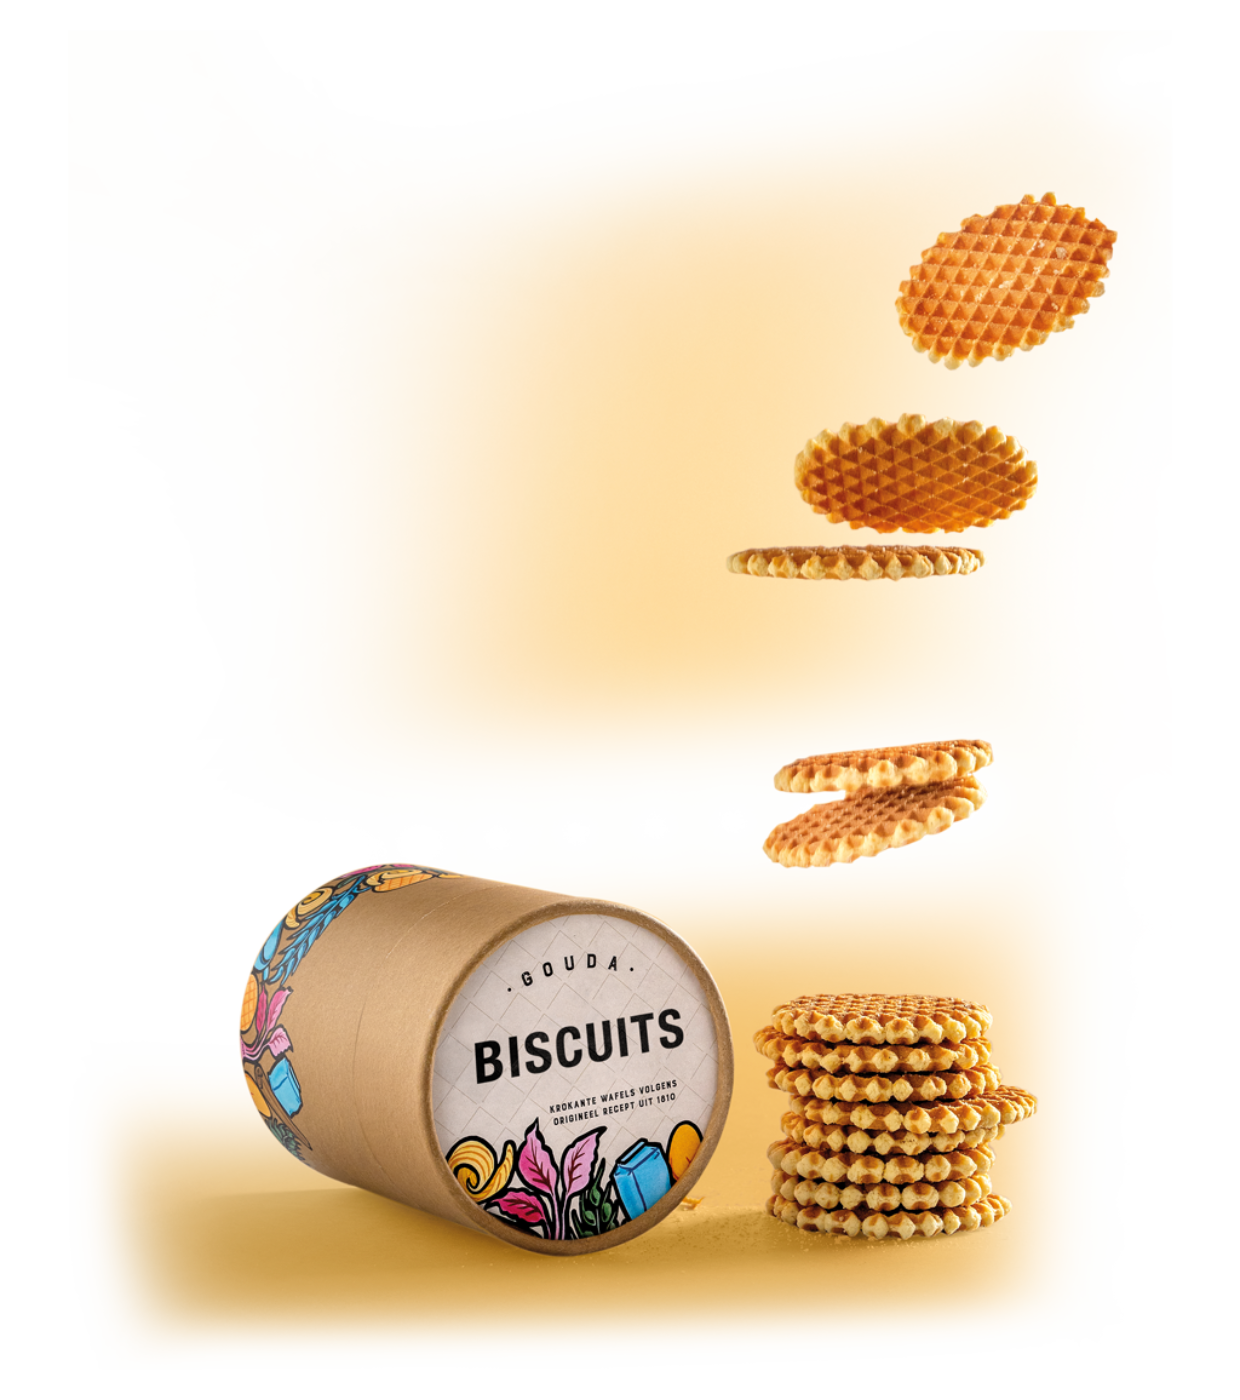 Cardboard packaging for biscuits and bakery products